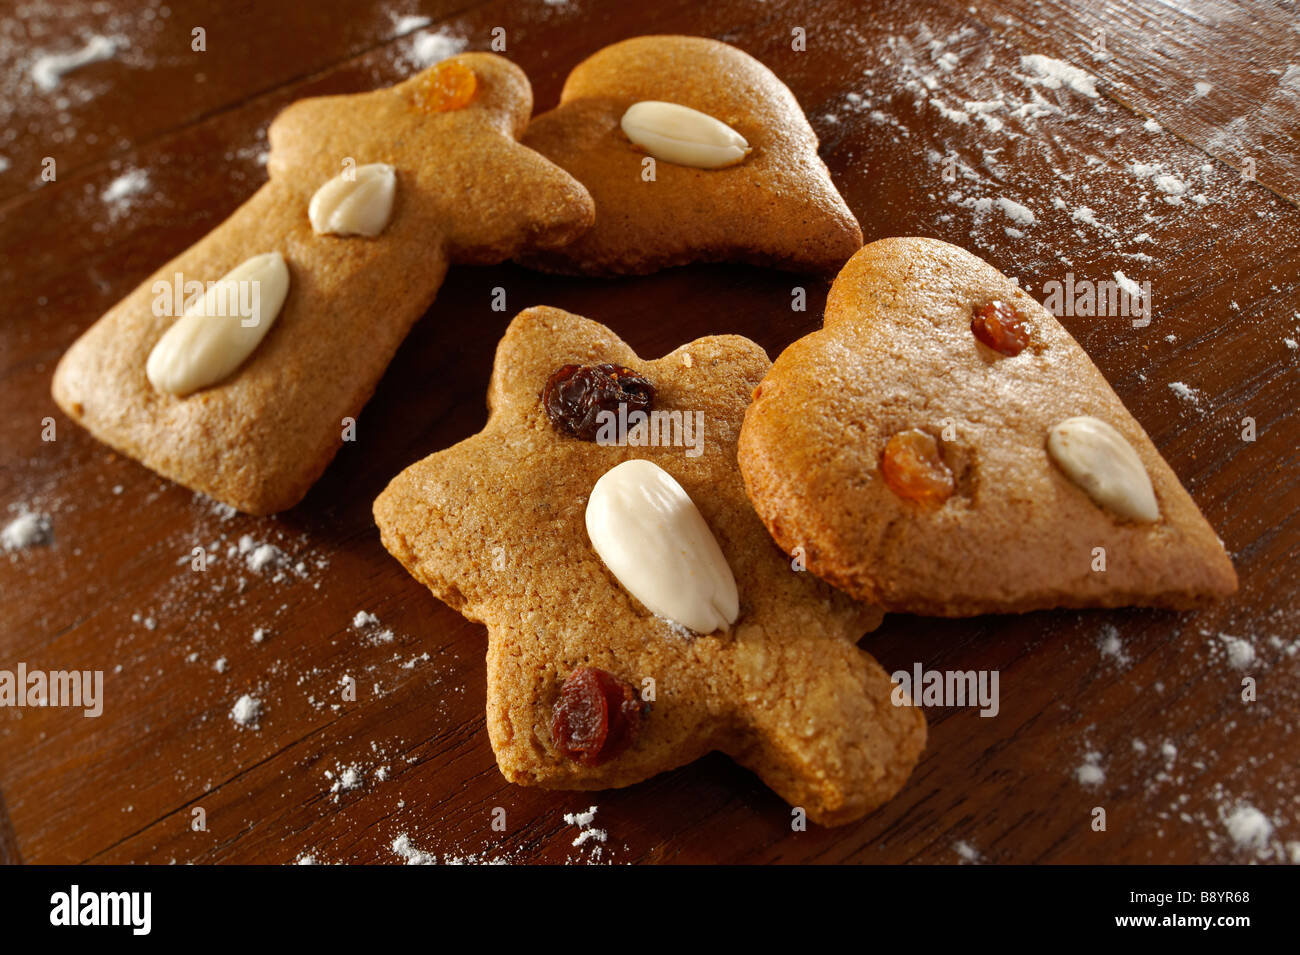 Fresh baked spicy christmas biscuits in s festive setting on a wooden table Stock Photo